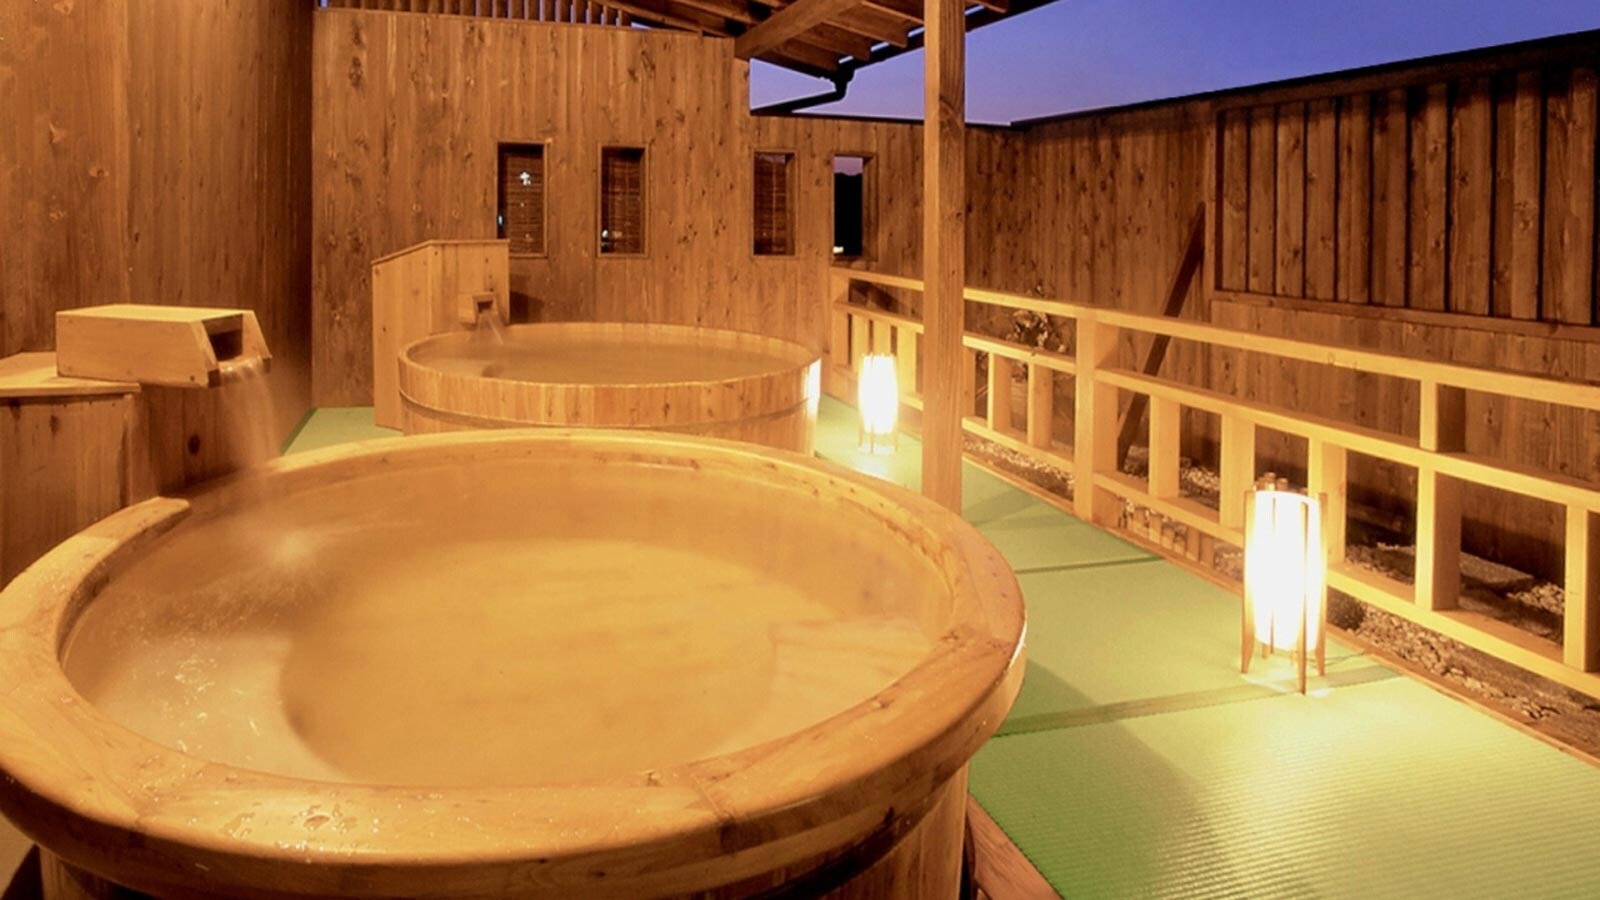 [Men's open-air bath] When the sun goes down and the lights turn on, the atmosphere improves!